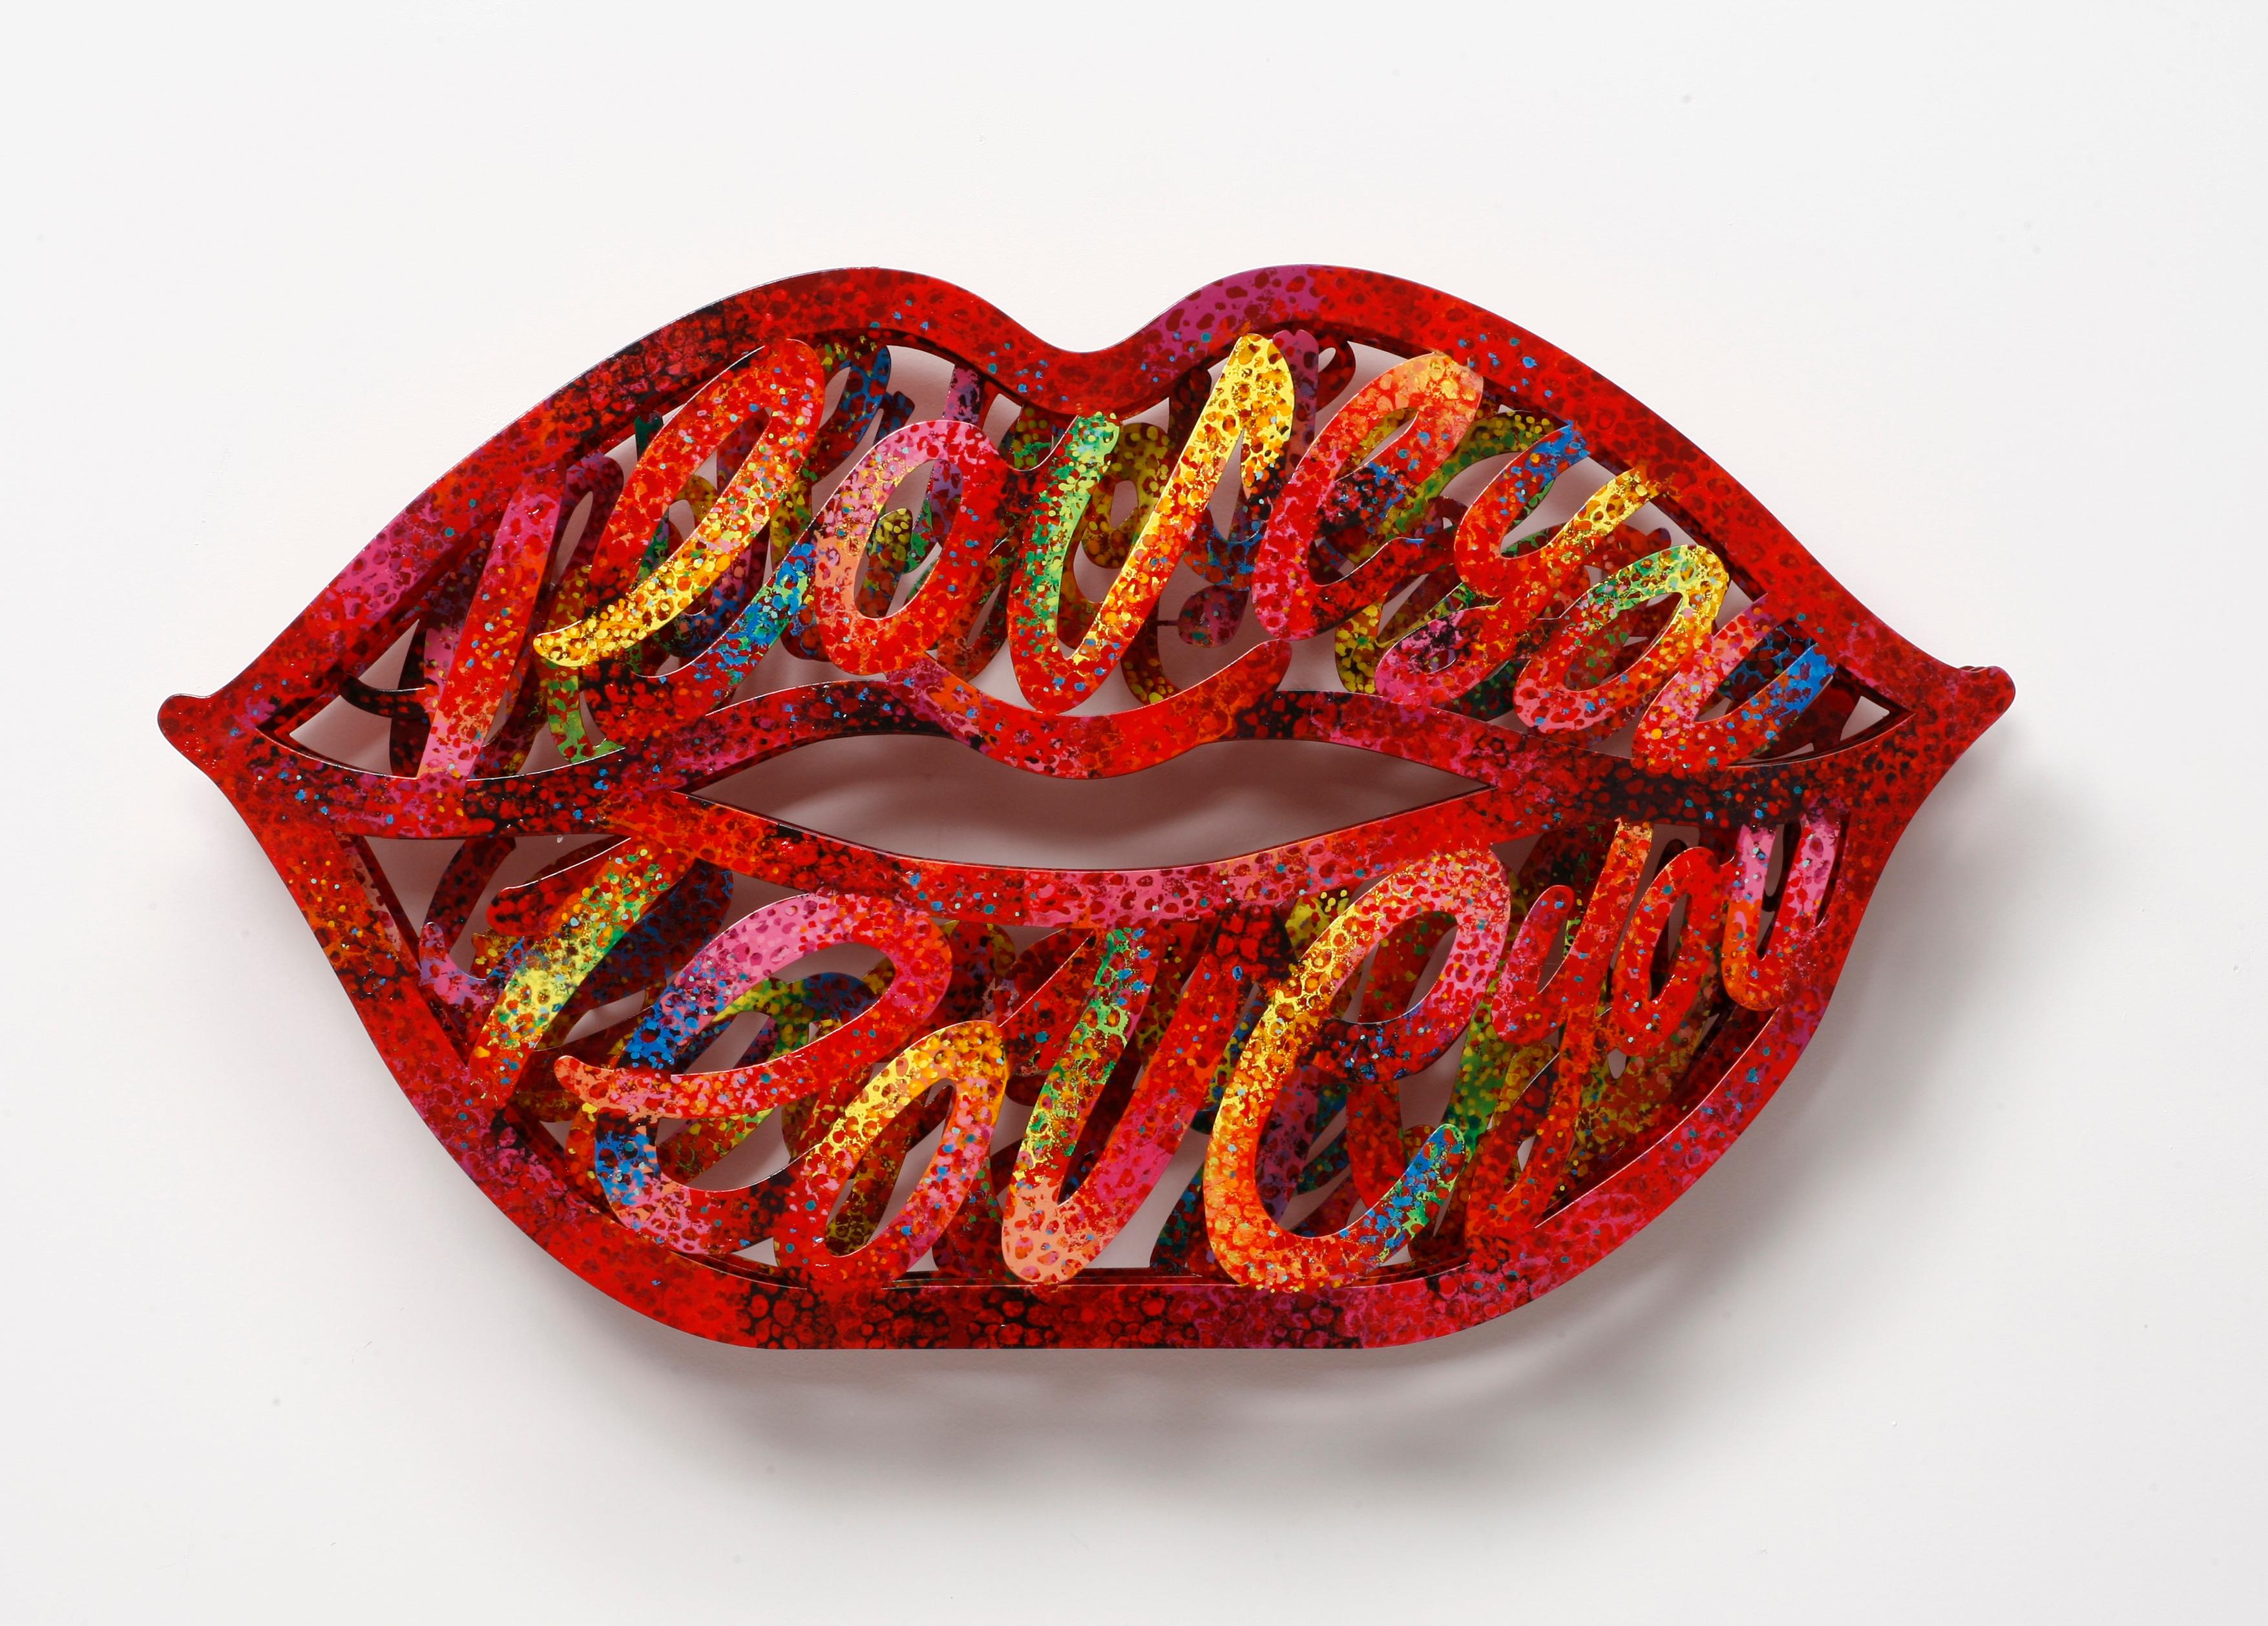 "Read My Lips", 3D Hand-painted Metal Wall Sculpture  - Mixed Media Art by David Gerstein